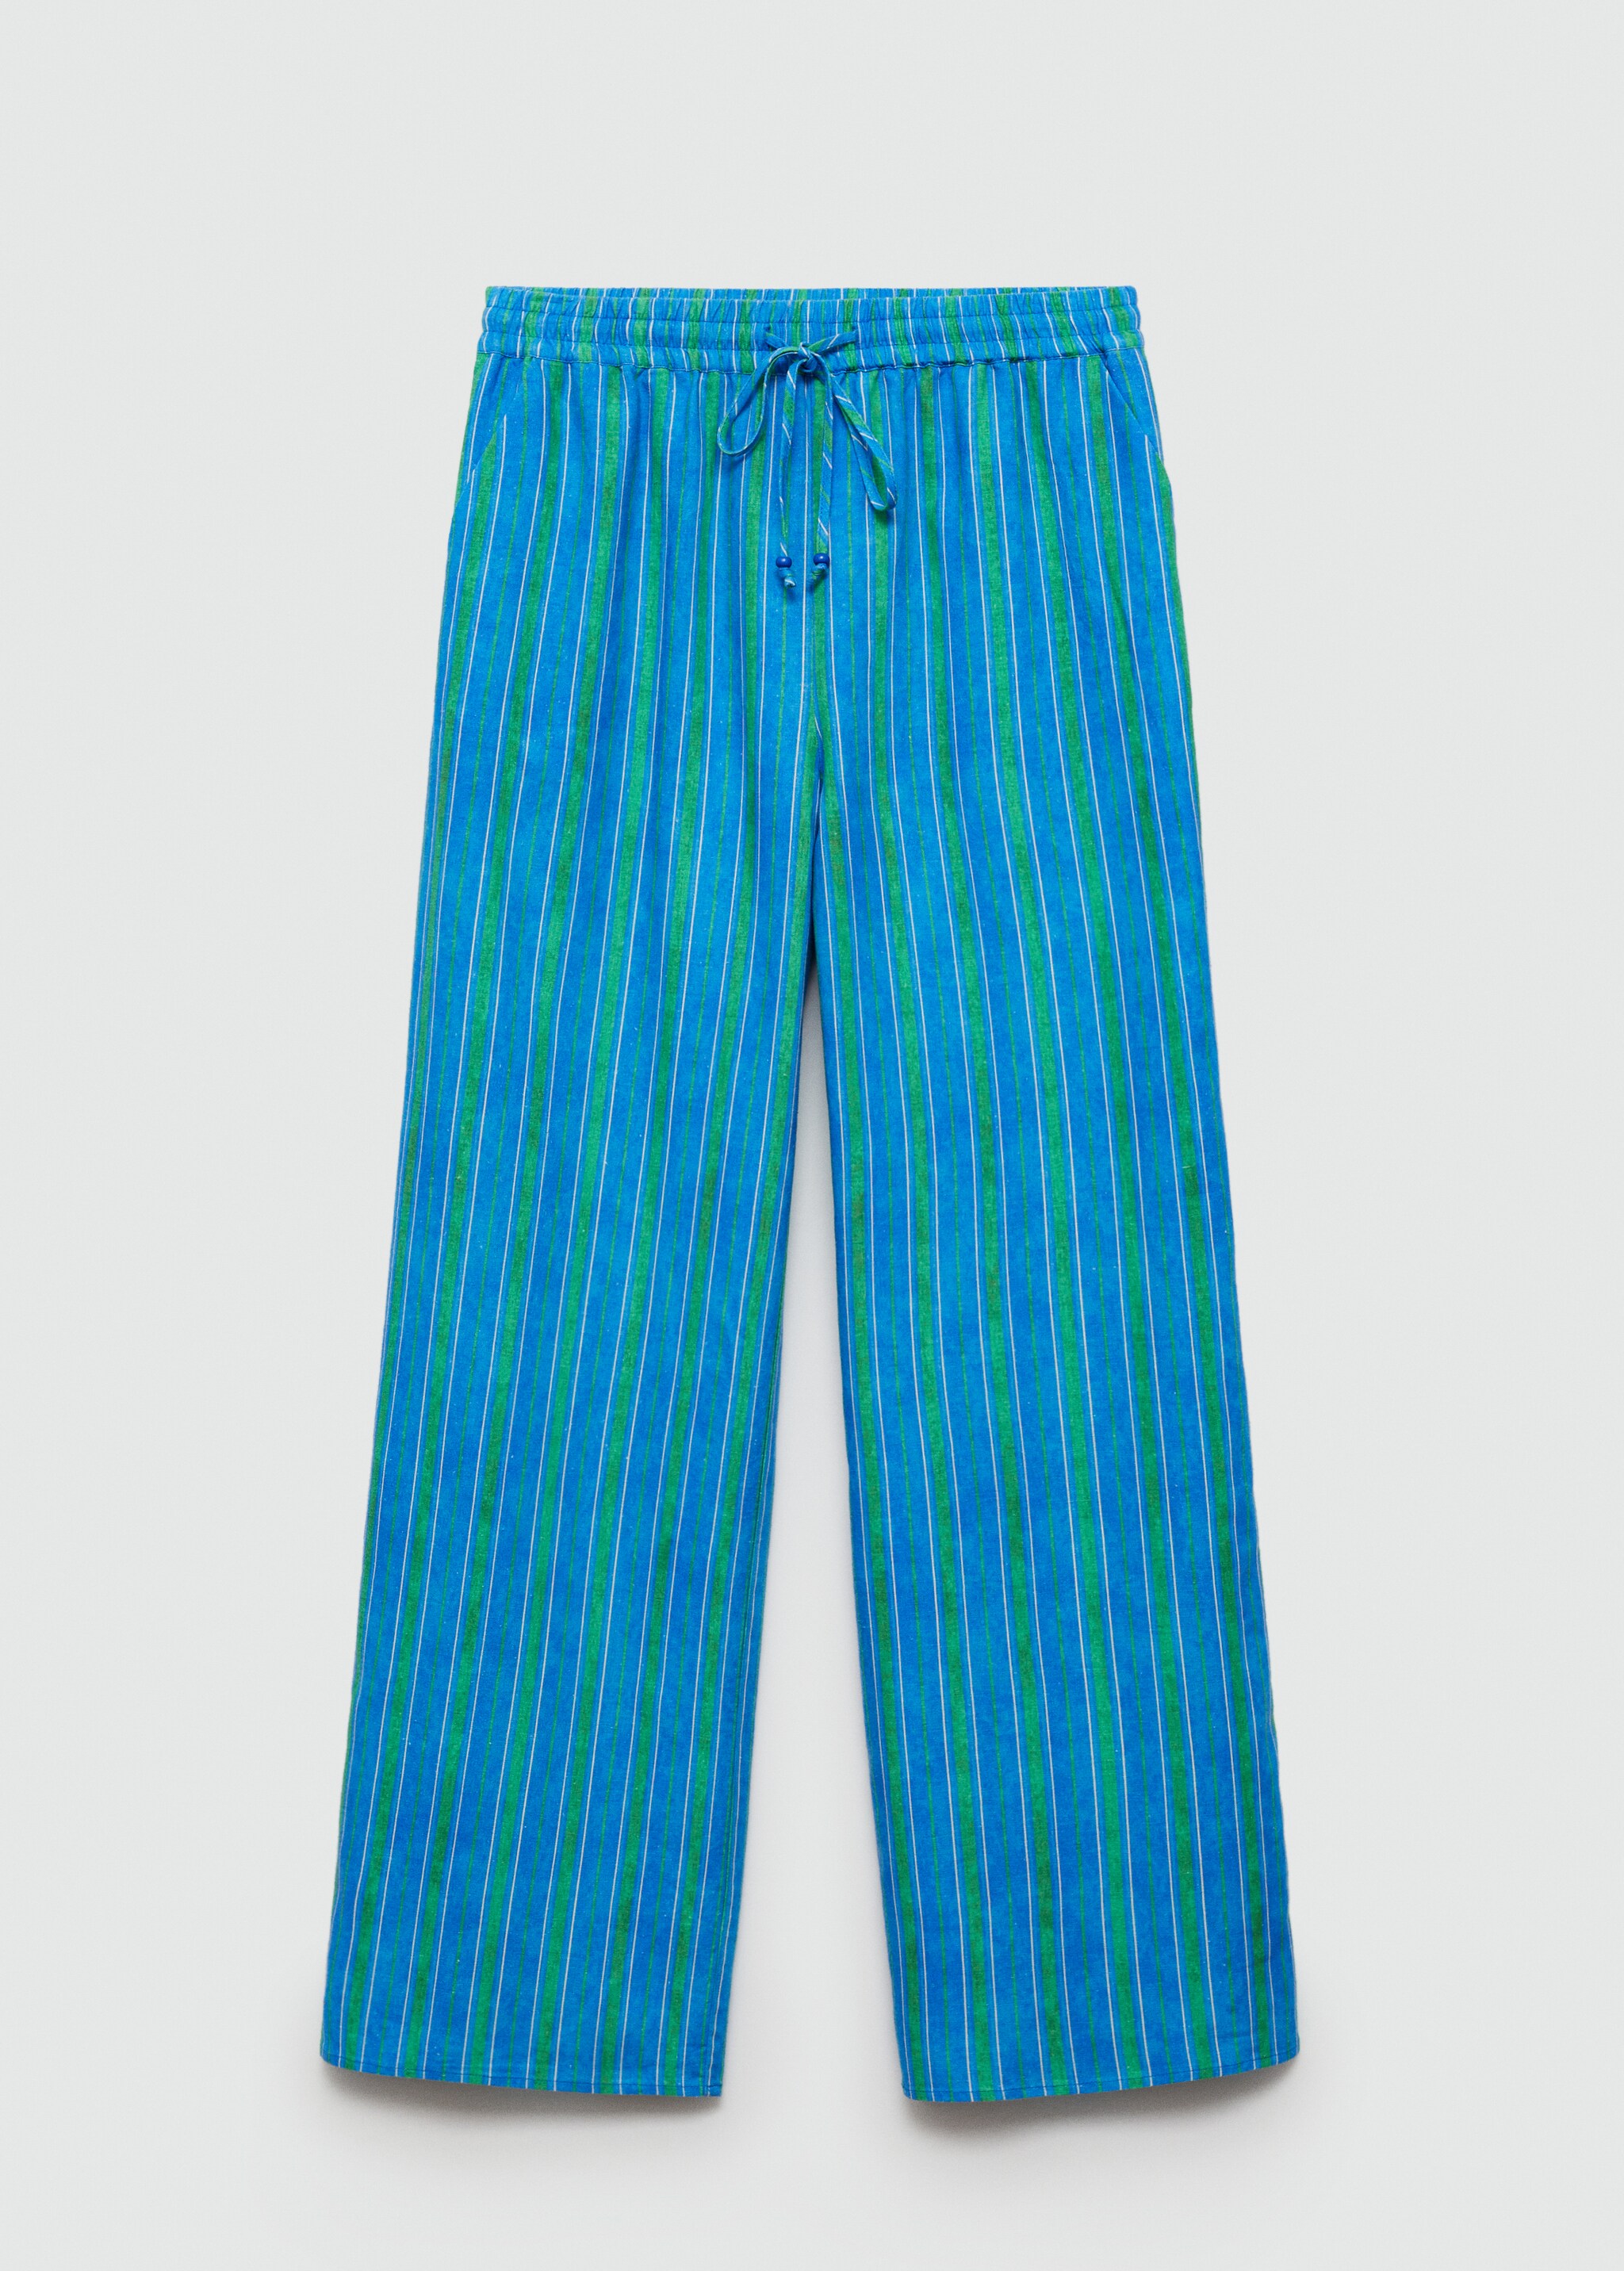 Striped printed linen trousers - Article without model